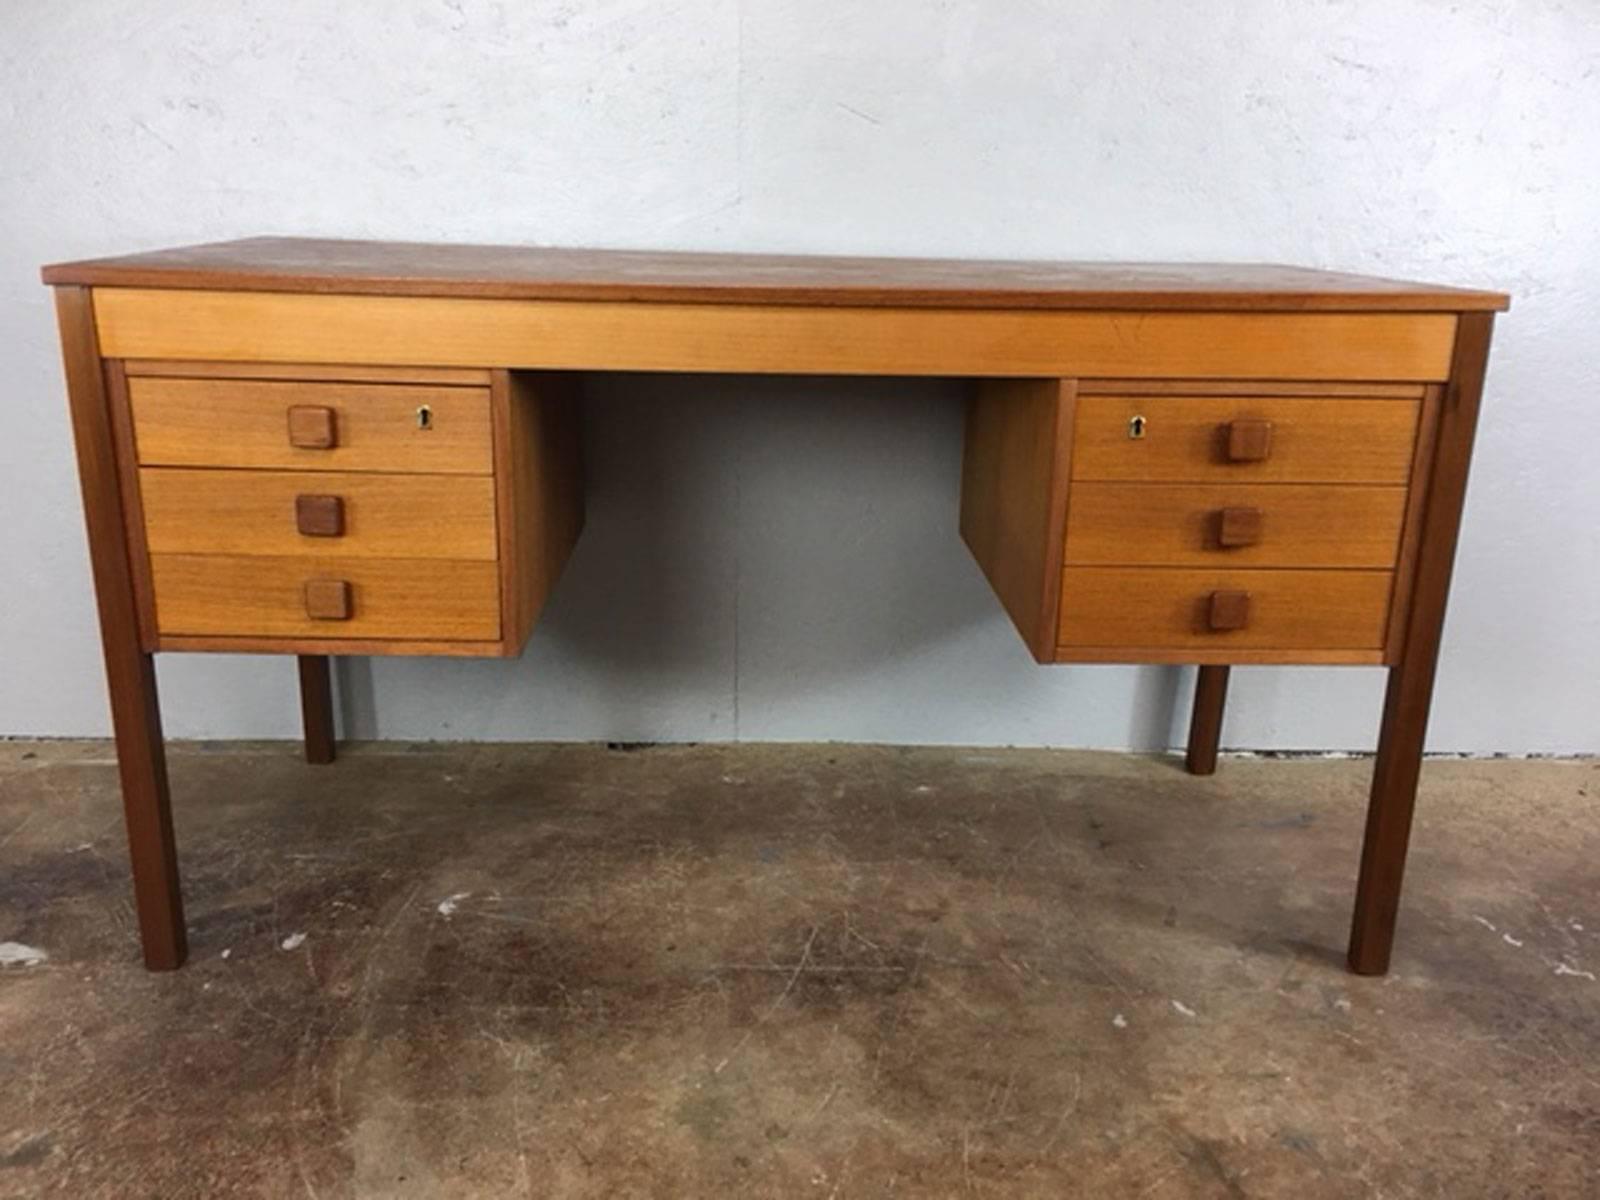 Teak desk with six drawers. Two locking drawers with key. Solid teak pulls. Original very good condition.